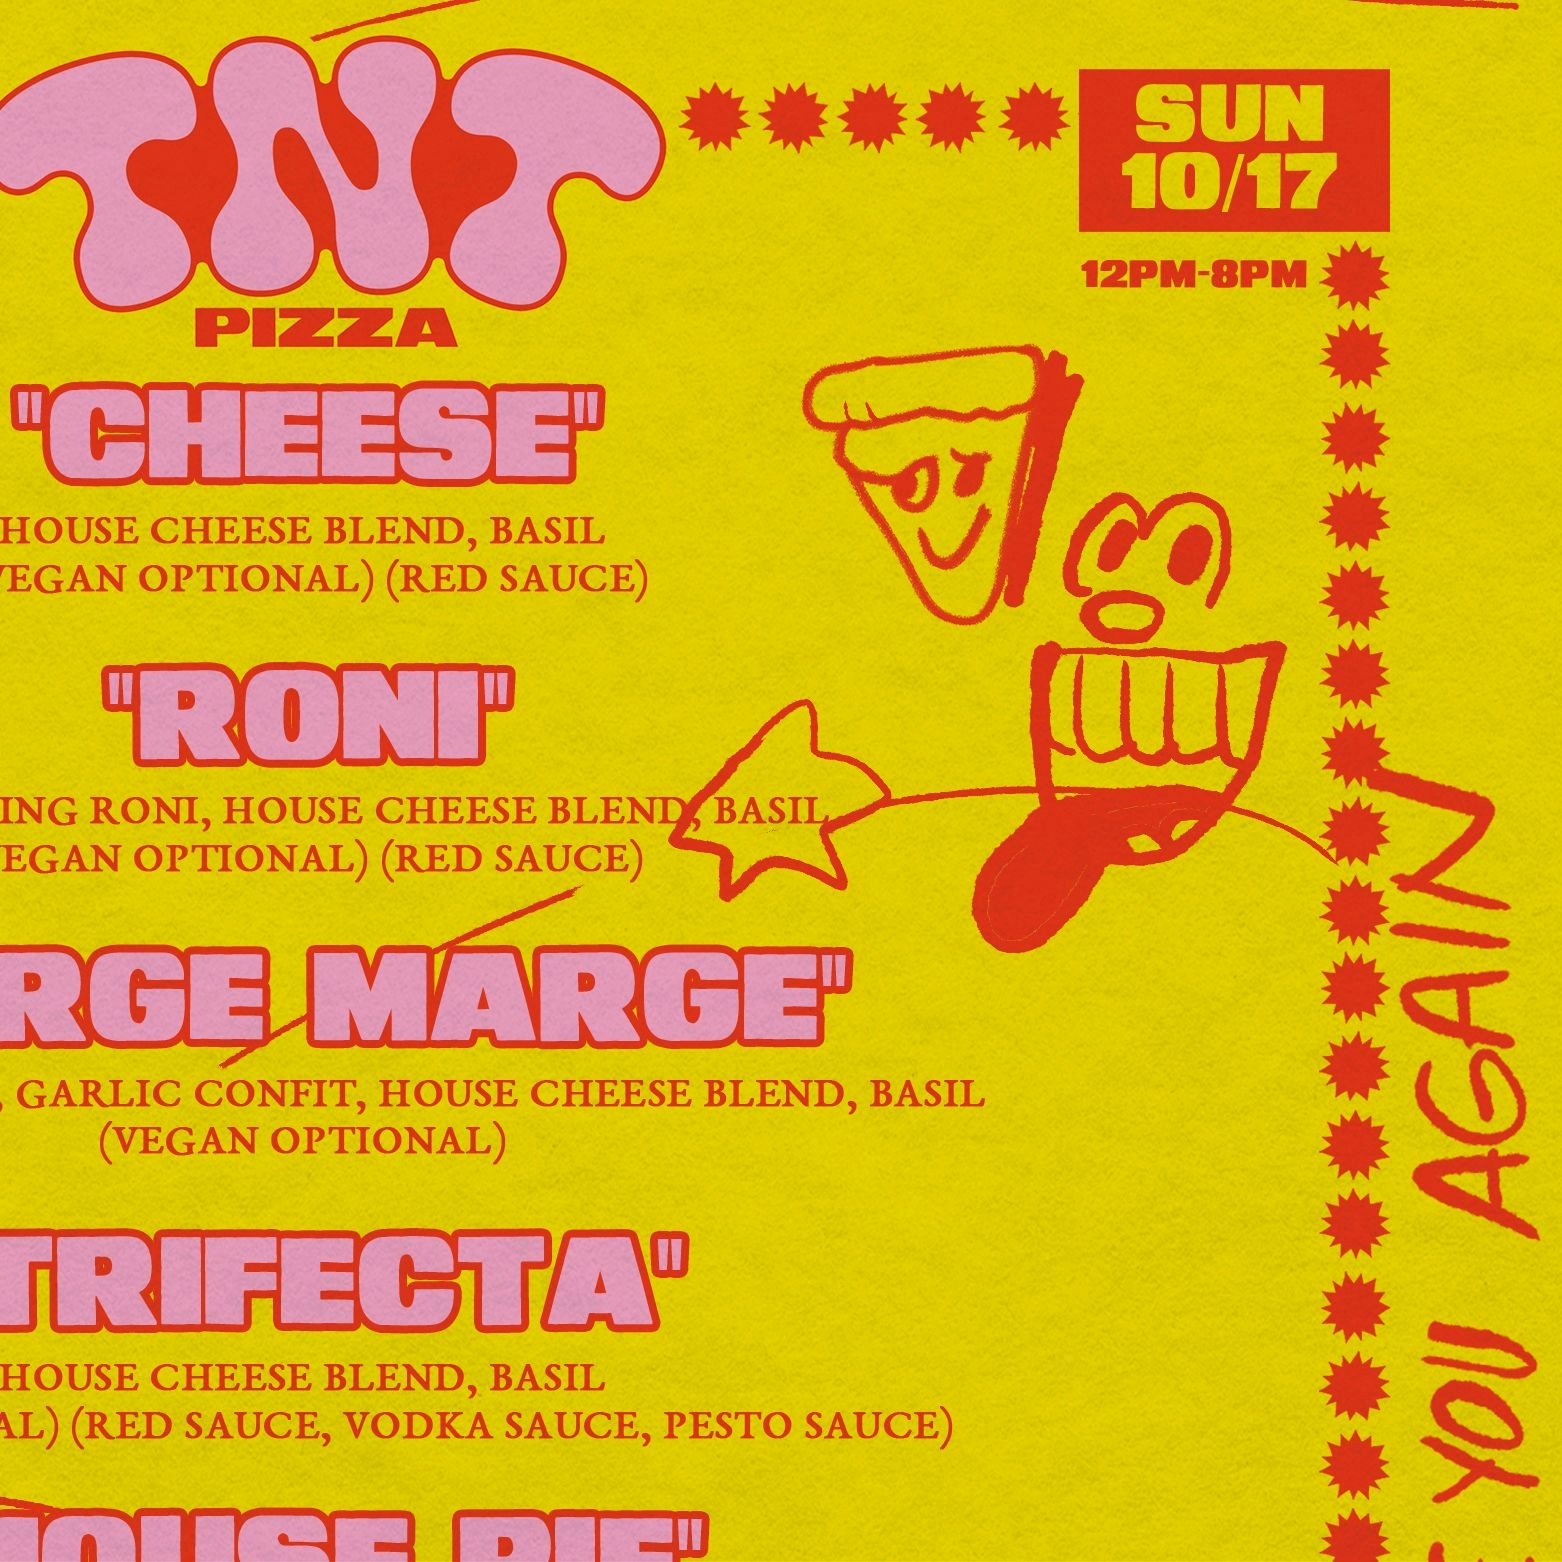 TNT Pizza yellow menu close-ups from the Brand Identity & Packaging project